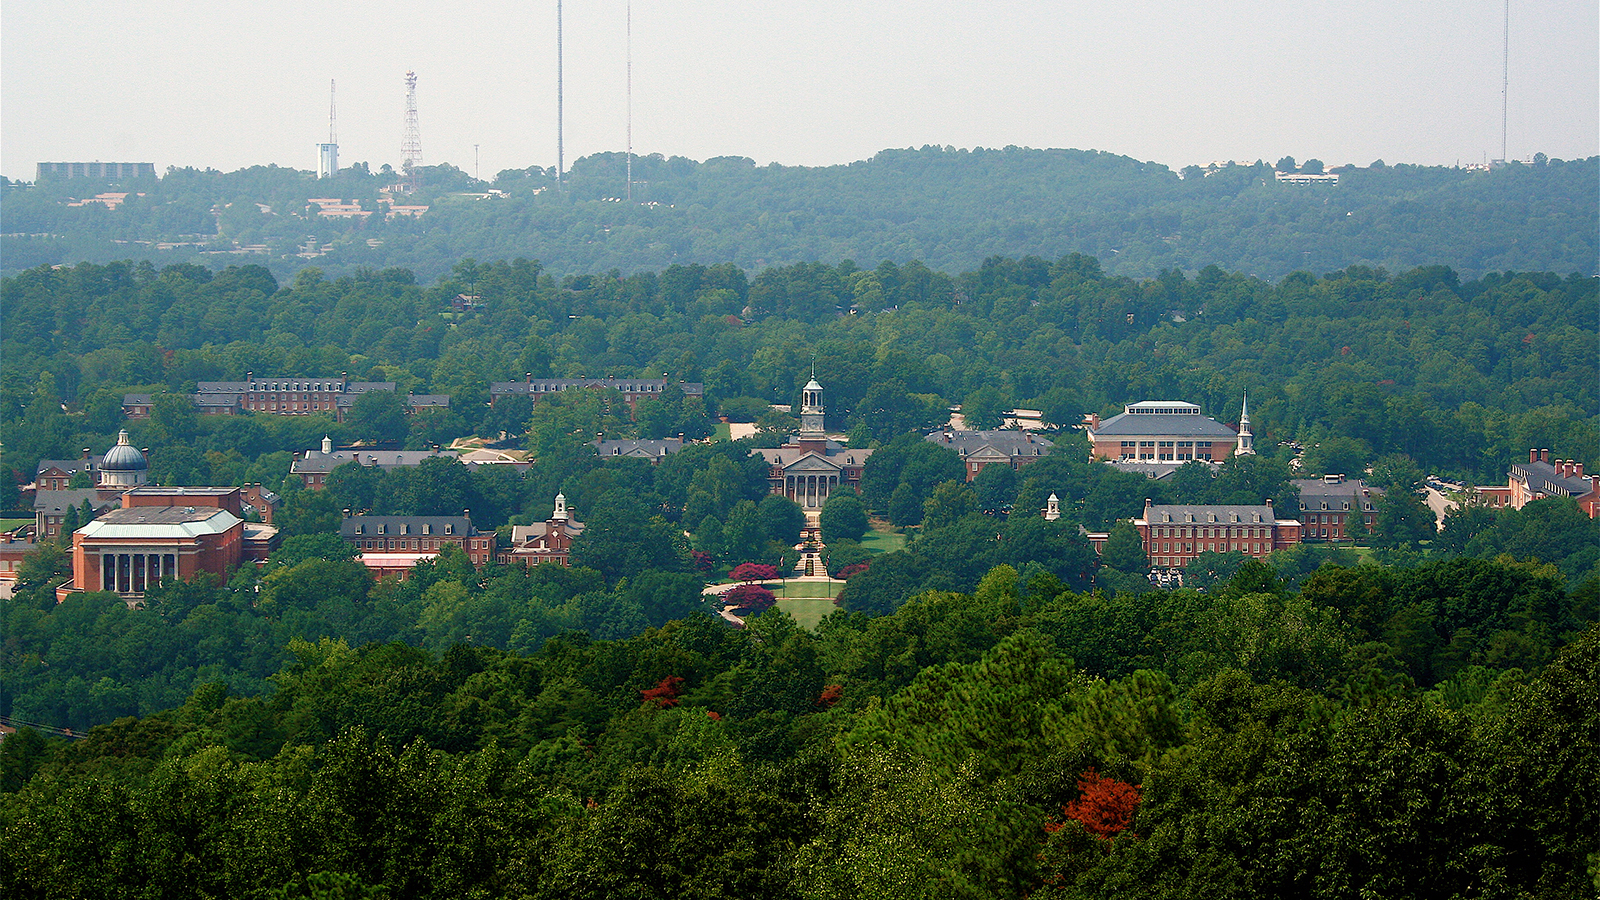 Aerial view of Samford University campus in Birmingham, Alabama. Photo by Sweetmoose6/Wikimedia/Creative Commons